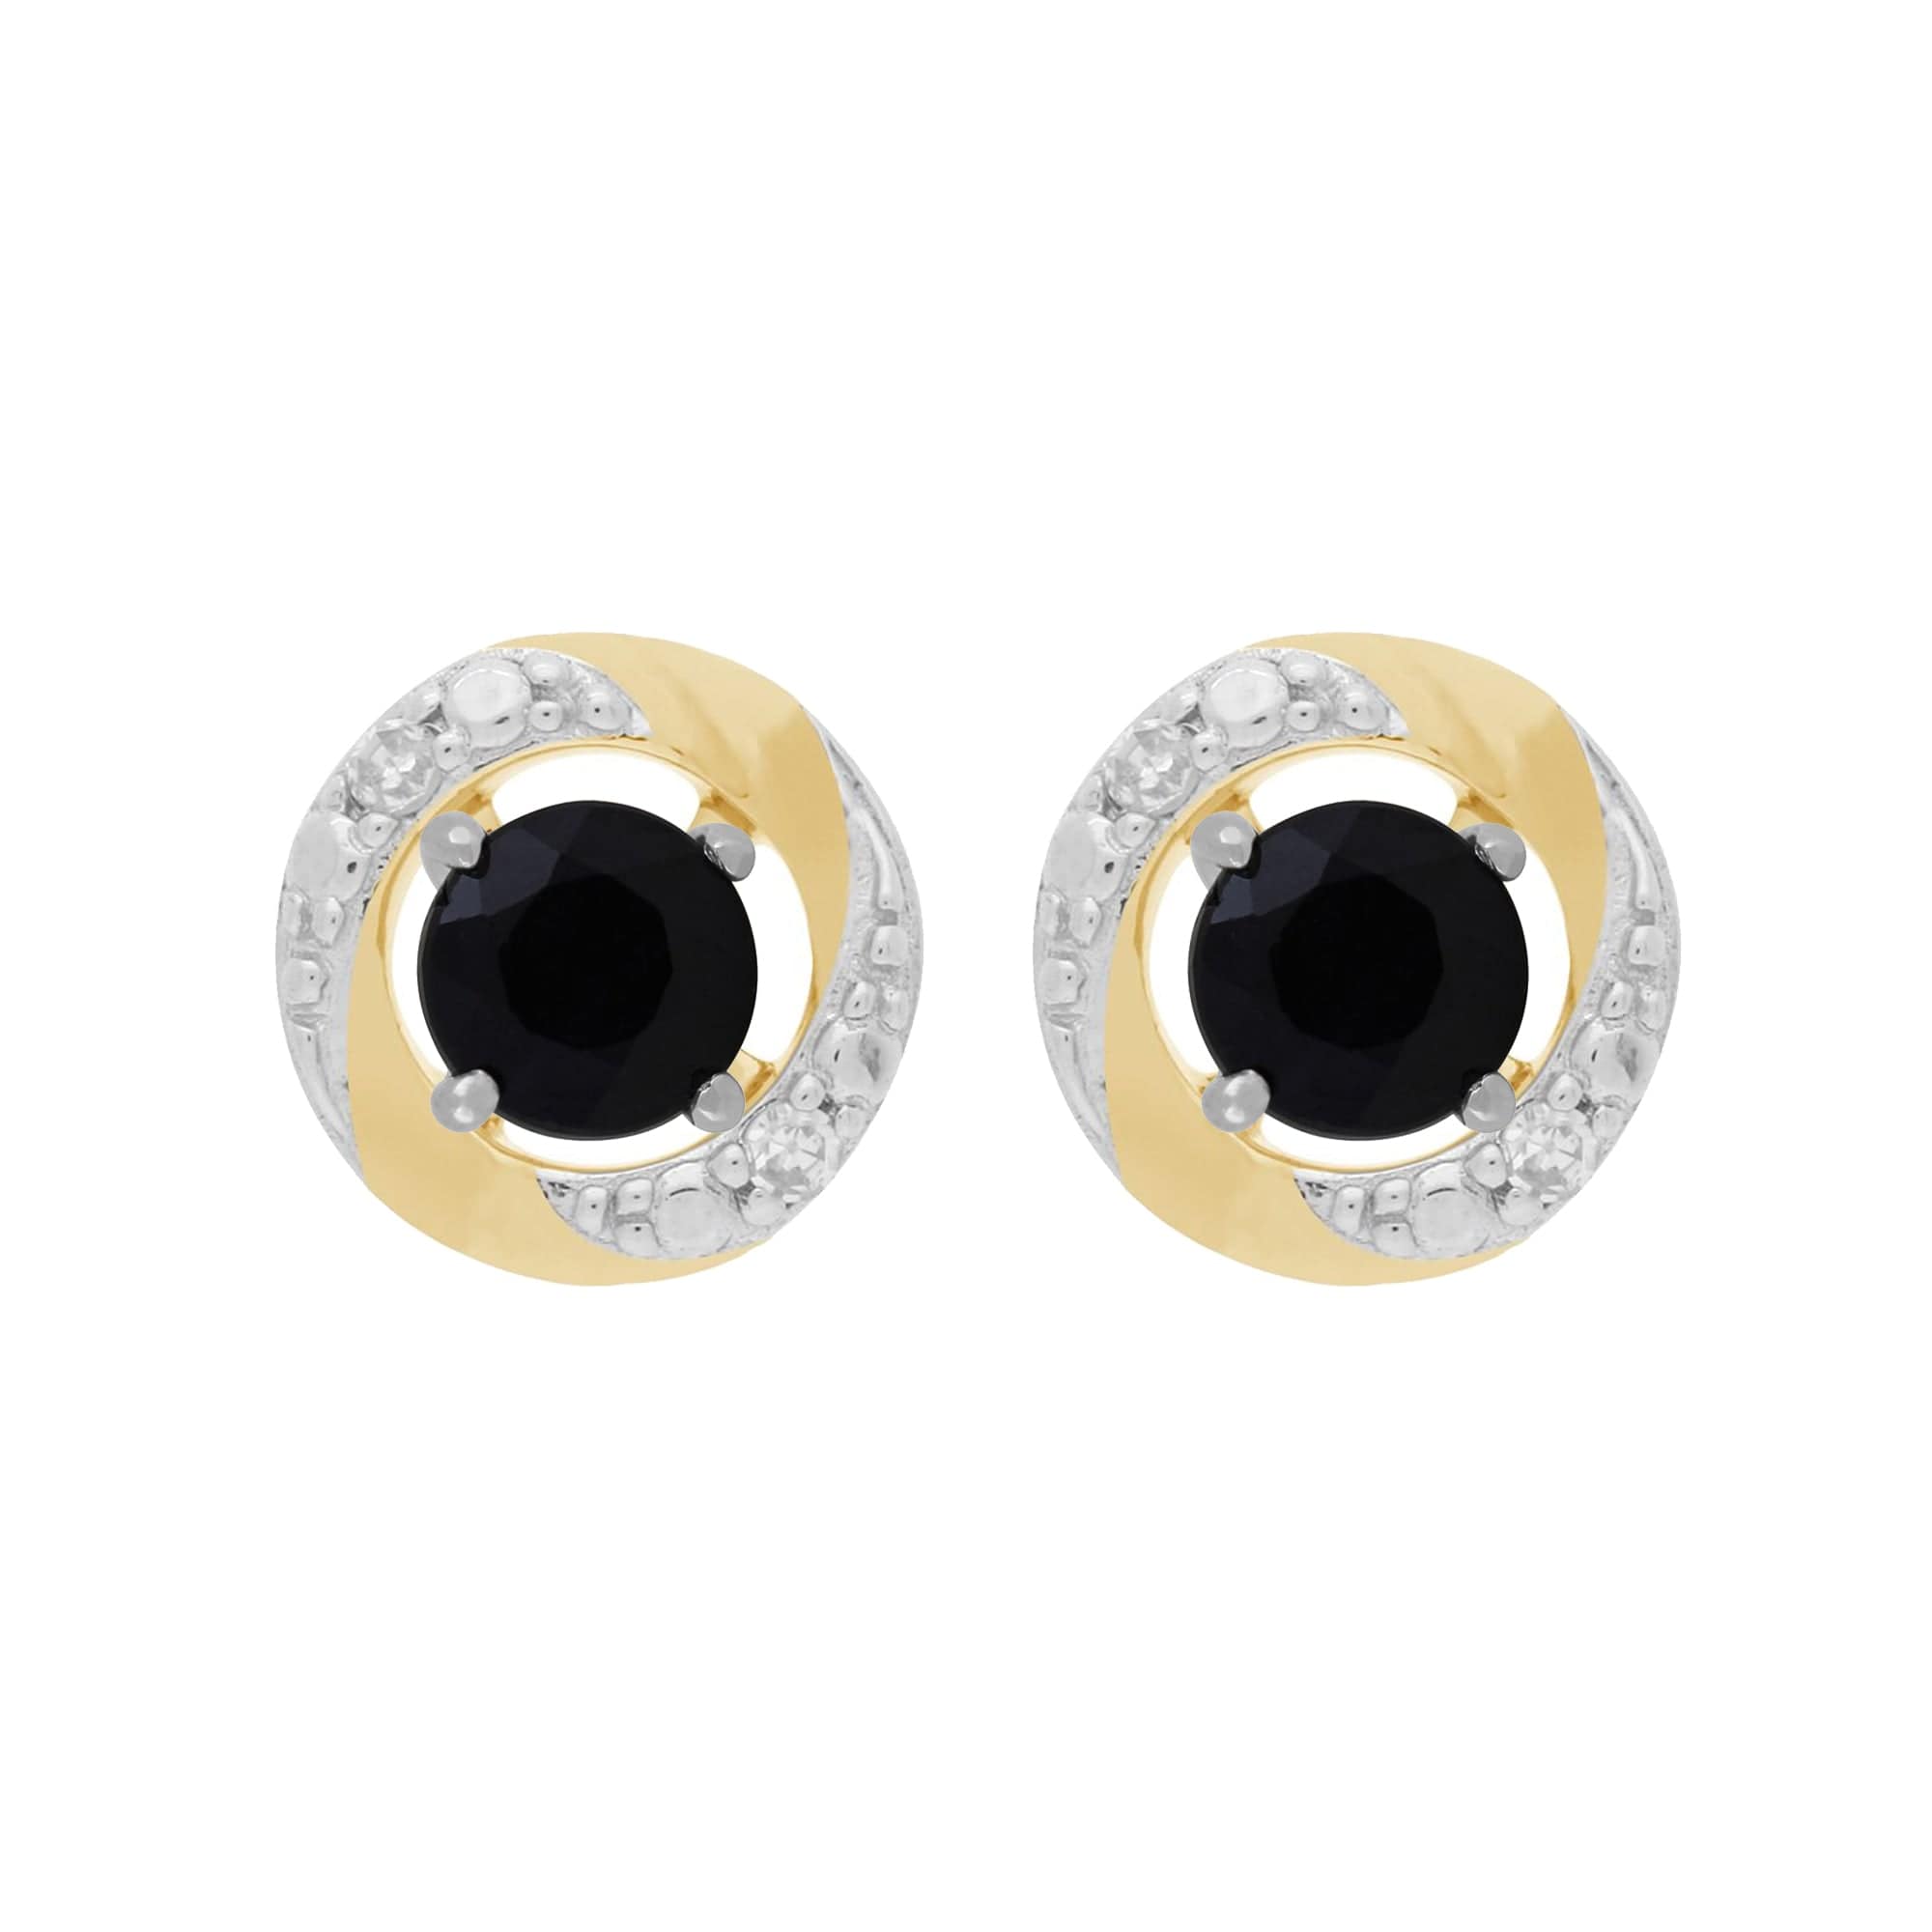 25167-191E0374019 9ct White Gold Dark Blue Sapphire Studs with Detachable Diamond Halo Ear Jacket in 9ct Yellow Gold 1